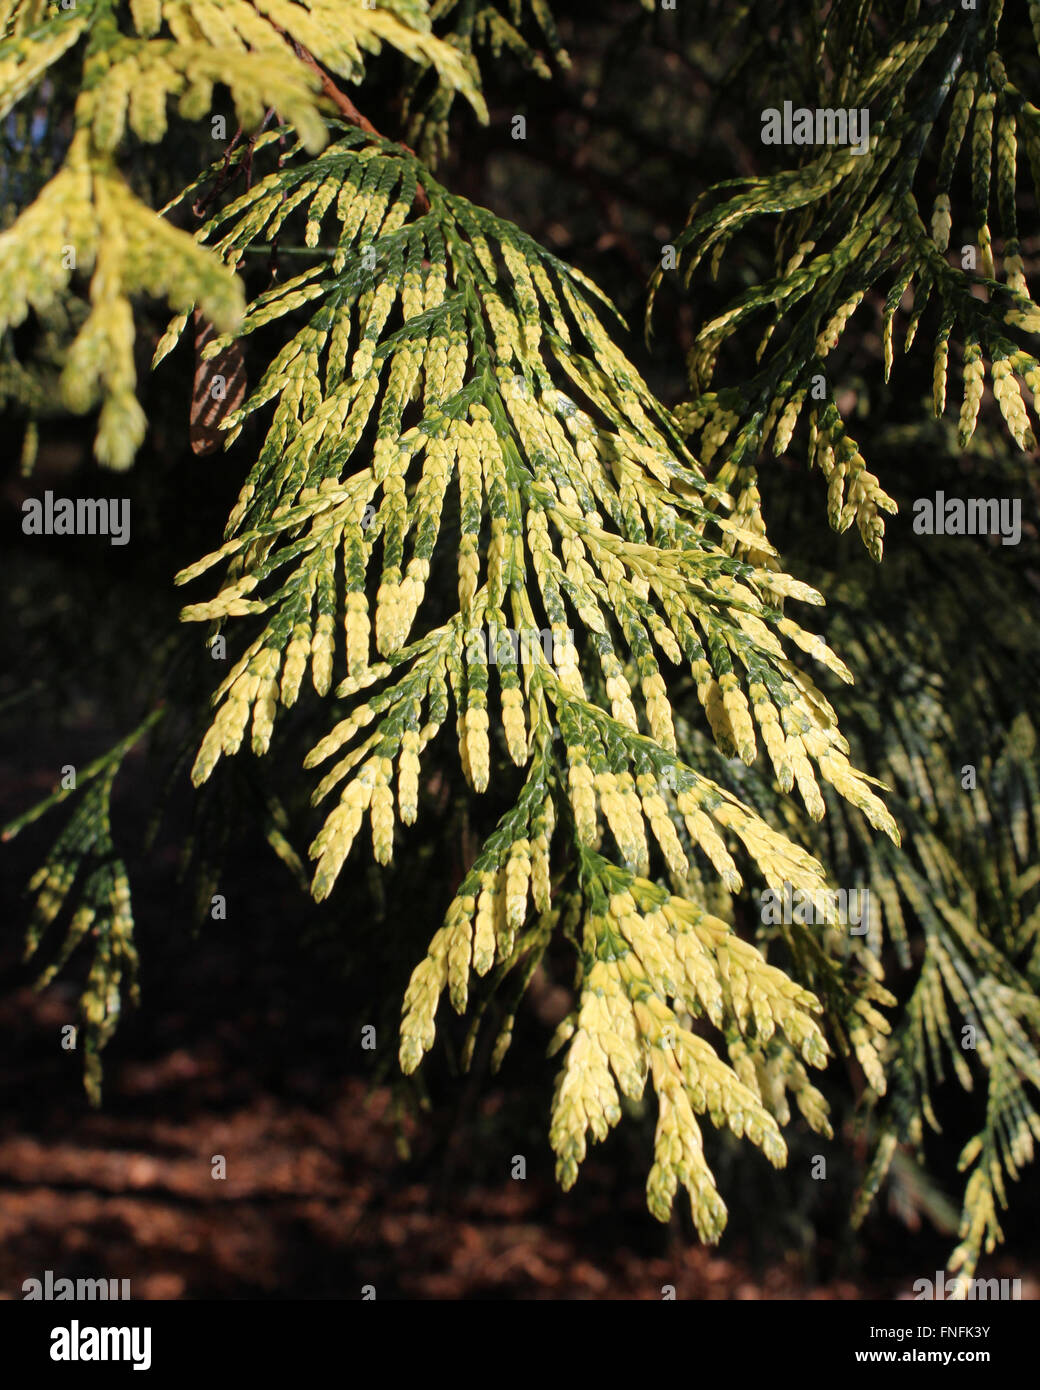 The beautiful variegated foliage of Thuja plicata 'Zebrina' also known as Western Red Cedar. Stock Photo